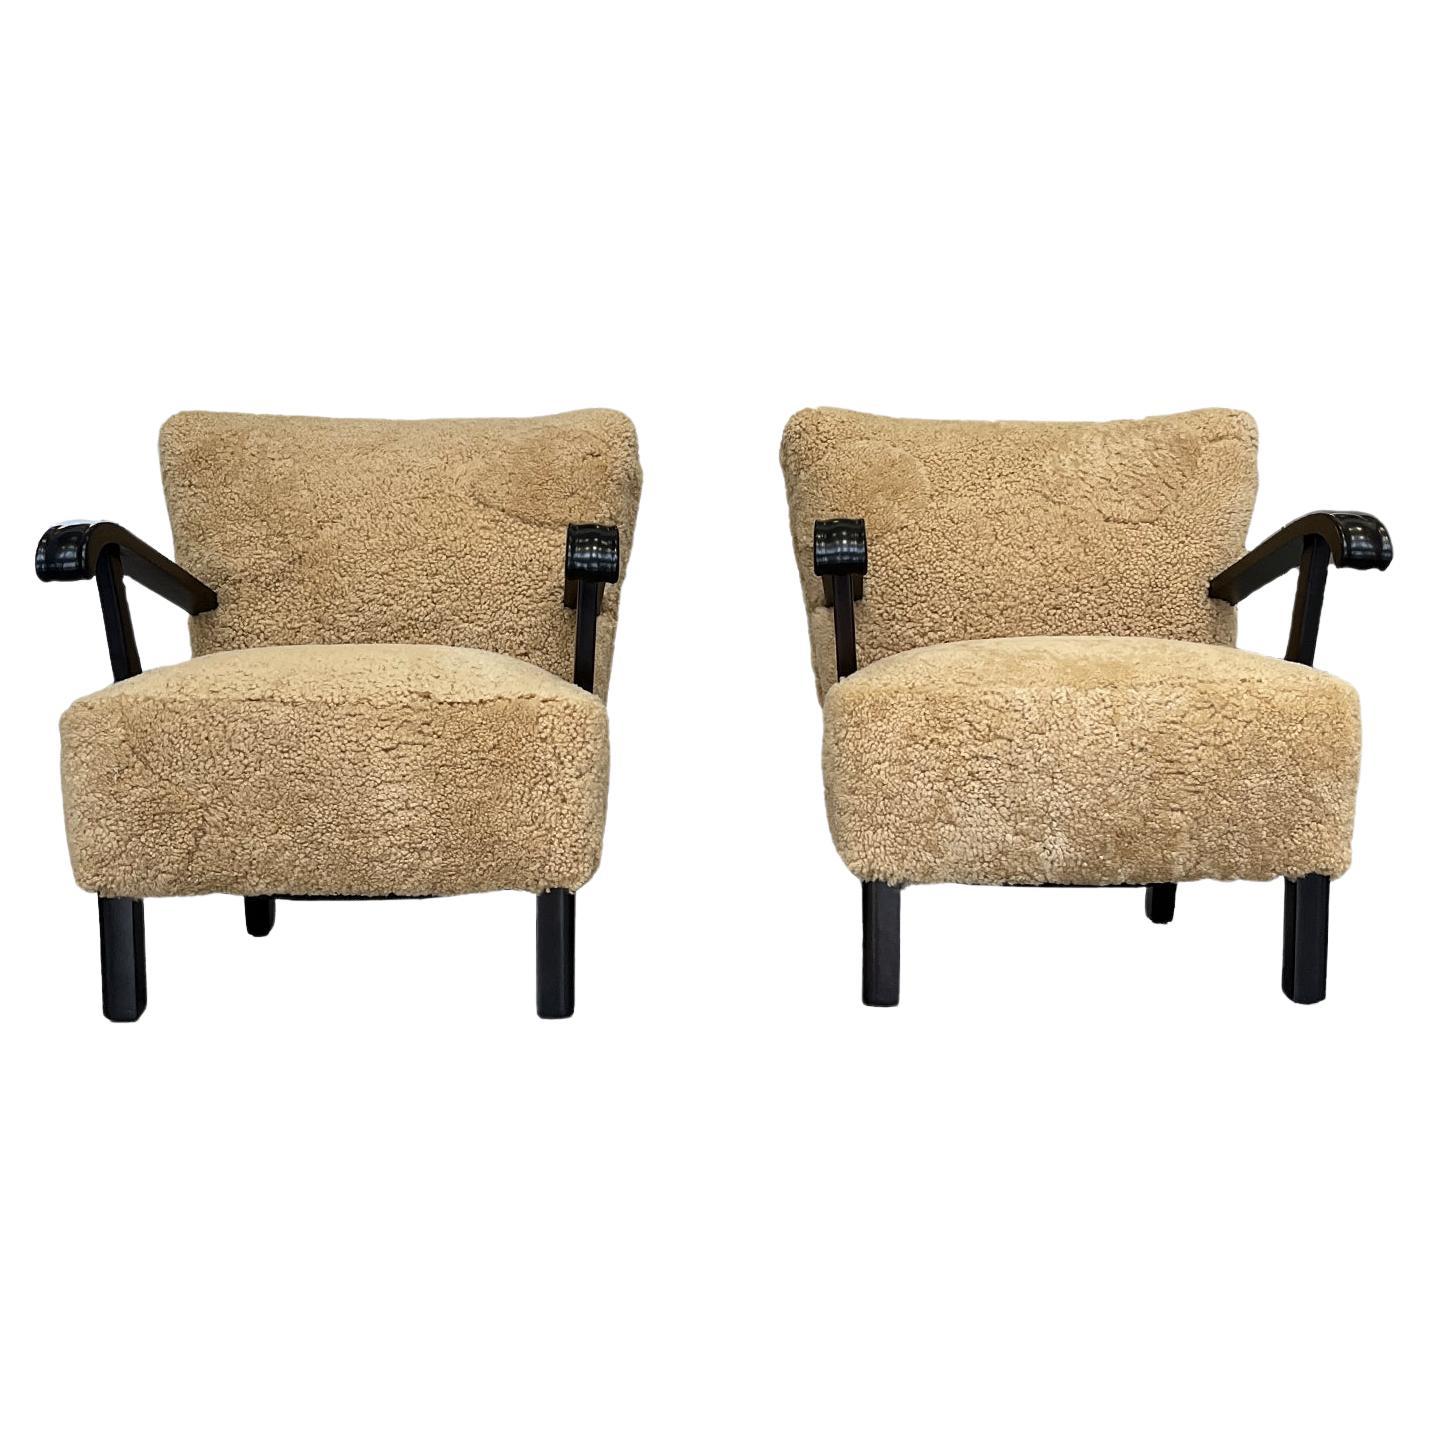 Pair of Mahogany and Shearling Armchairs by Alfred Christensen